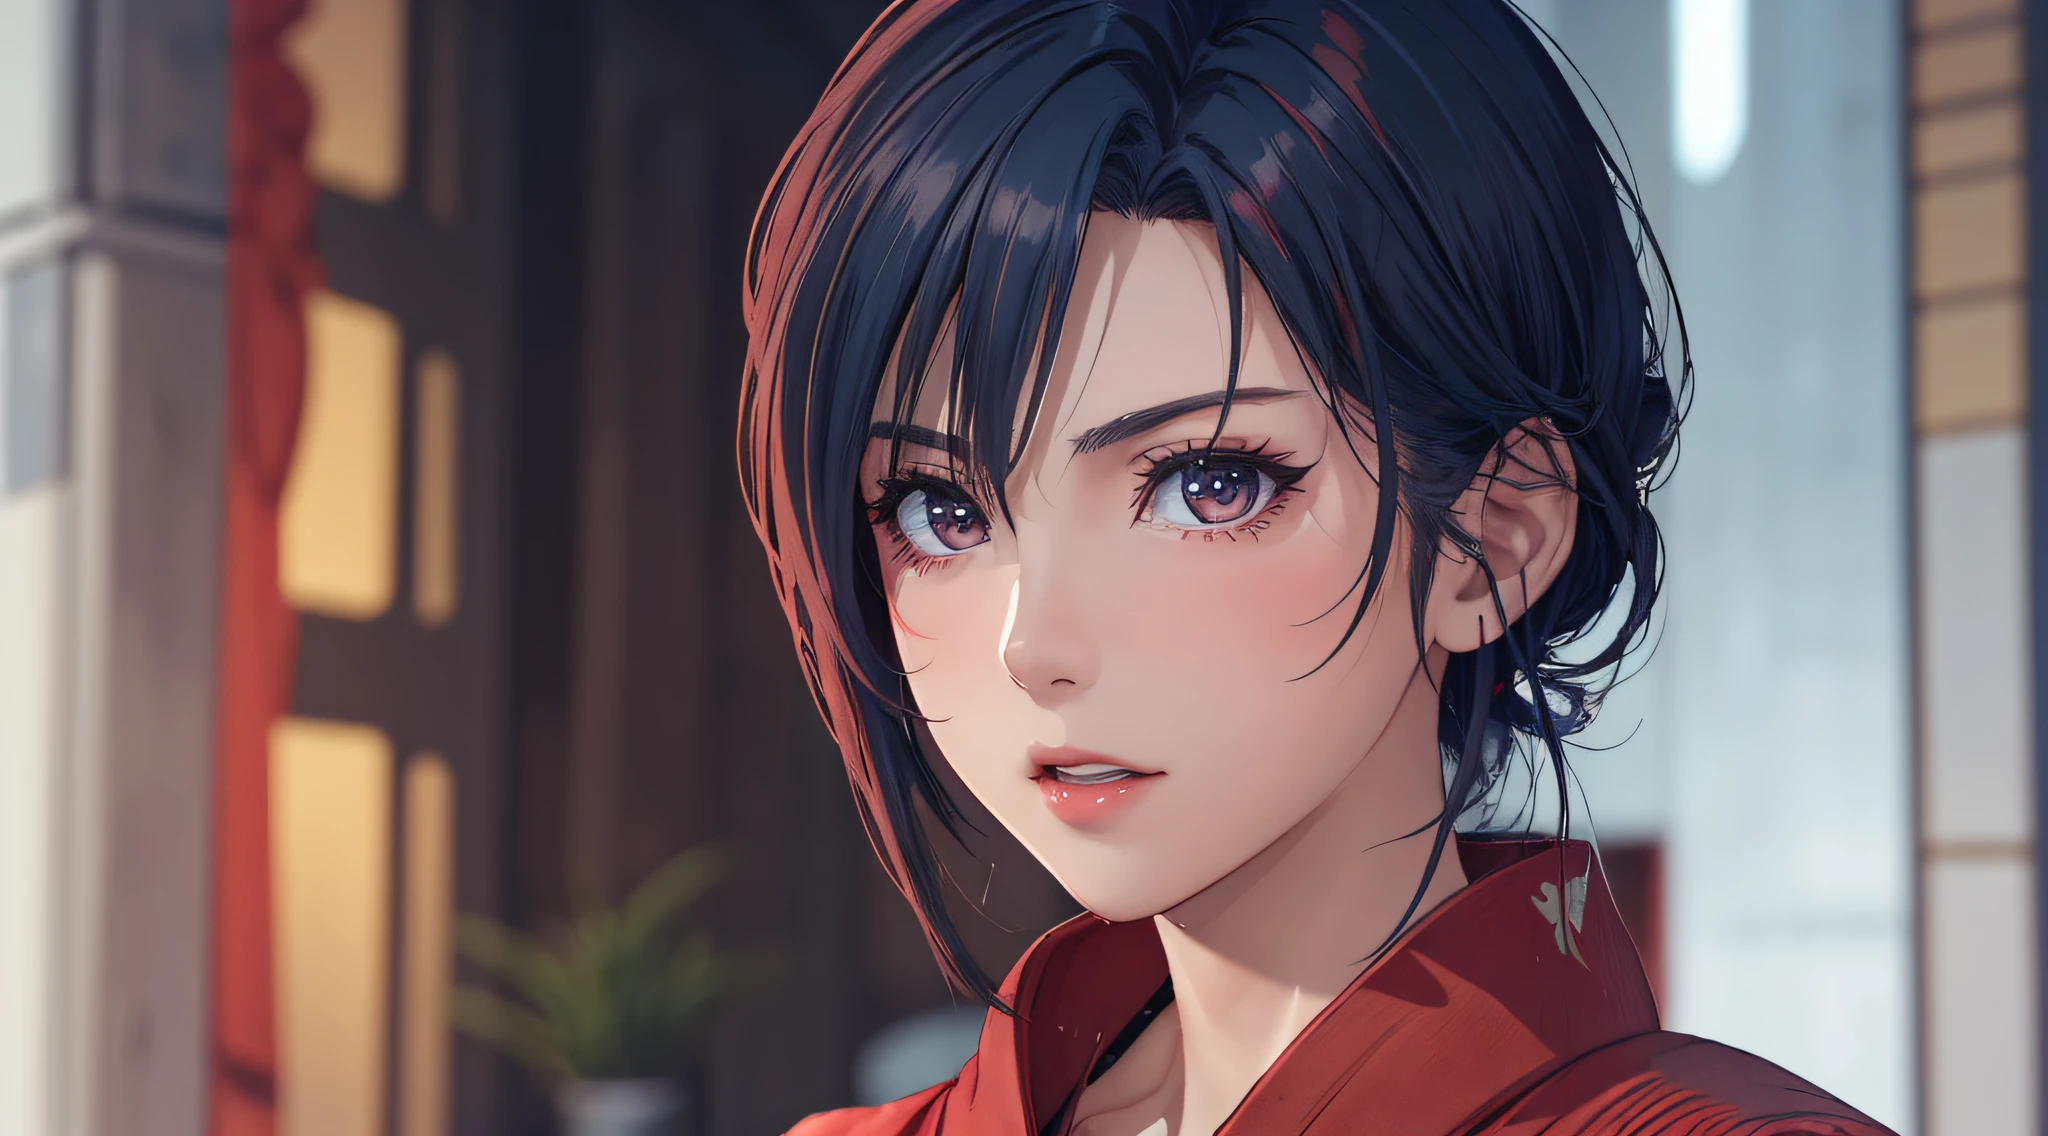 Sareme、((Incredibly beautiful villain woman in red kimono:1.3))、((NSFW))、Asymmetrical ultra-short hair,、cleavage of the breast、a matural female、Very boyish and cool、sky blue hair,Red inner hair、Bedroom with cyberpunk night view、Great lighting、Small eyes、Black eyes、D-Cup Peak、serious facial expression